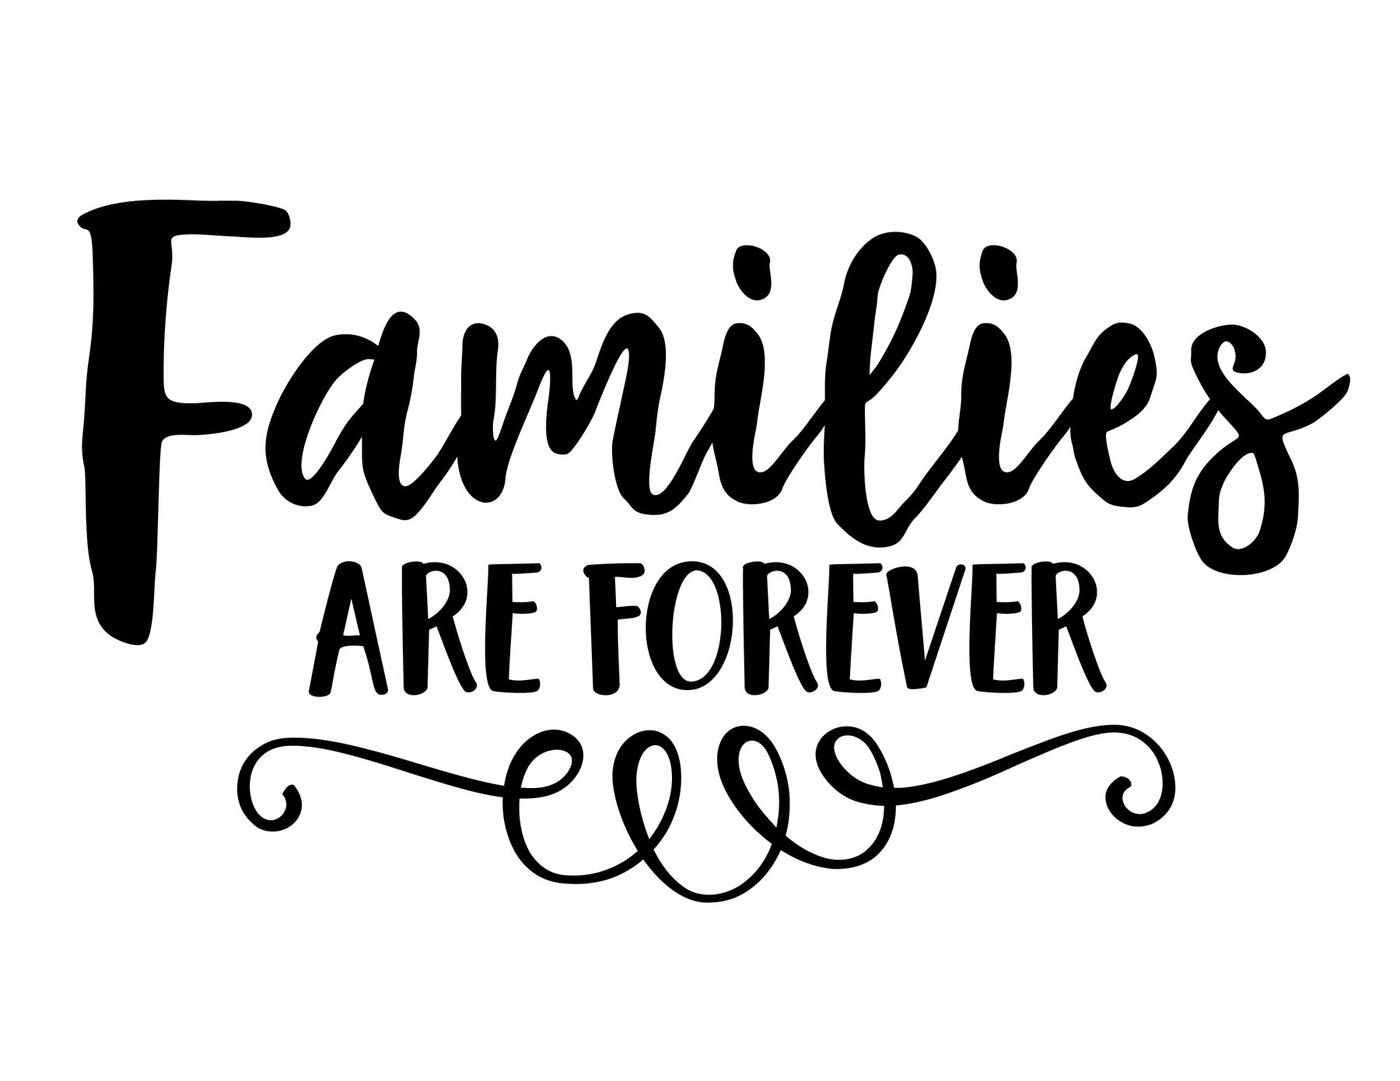 Families Are Forever Svg Cut File Png Eps Jpeg Dxf By Shannon Keyser Thehungryjpeg Com